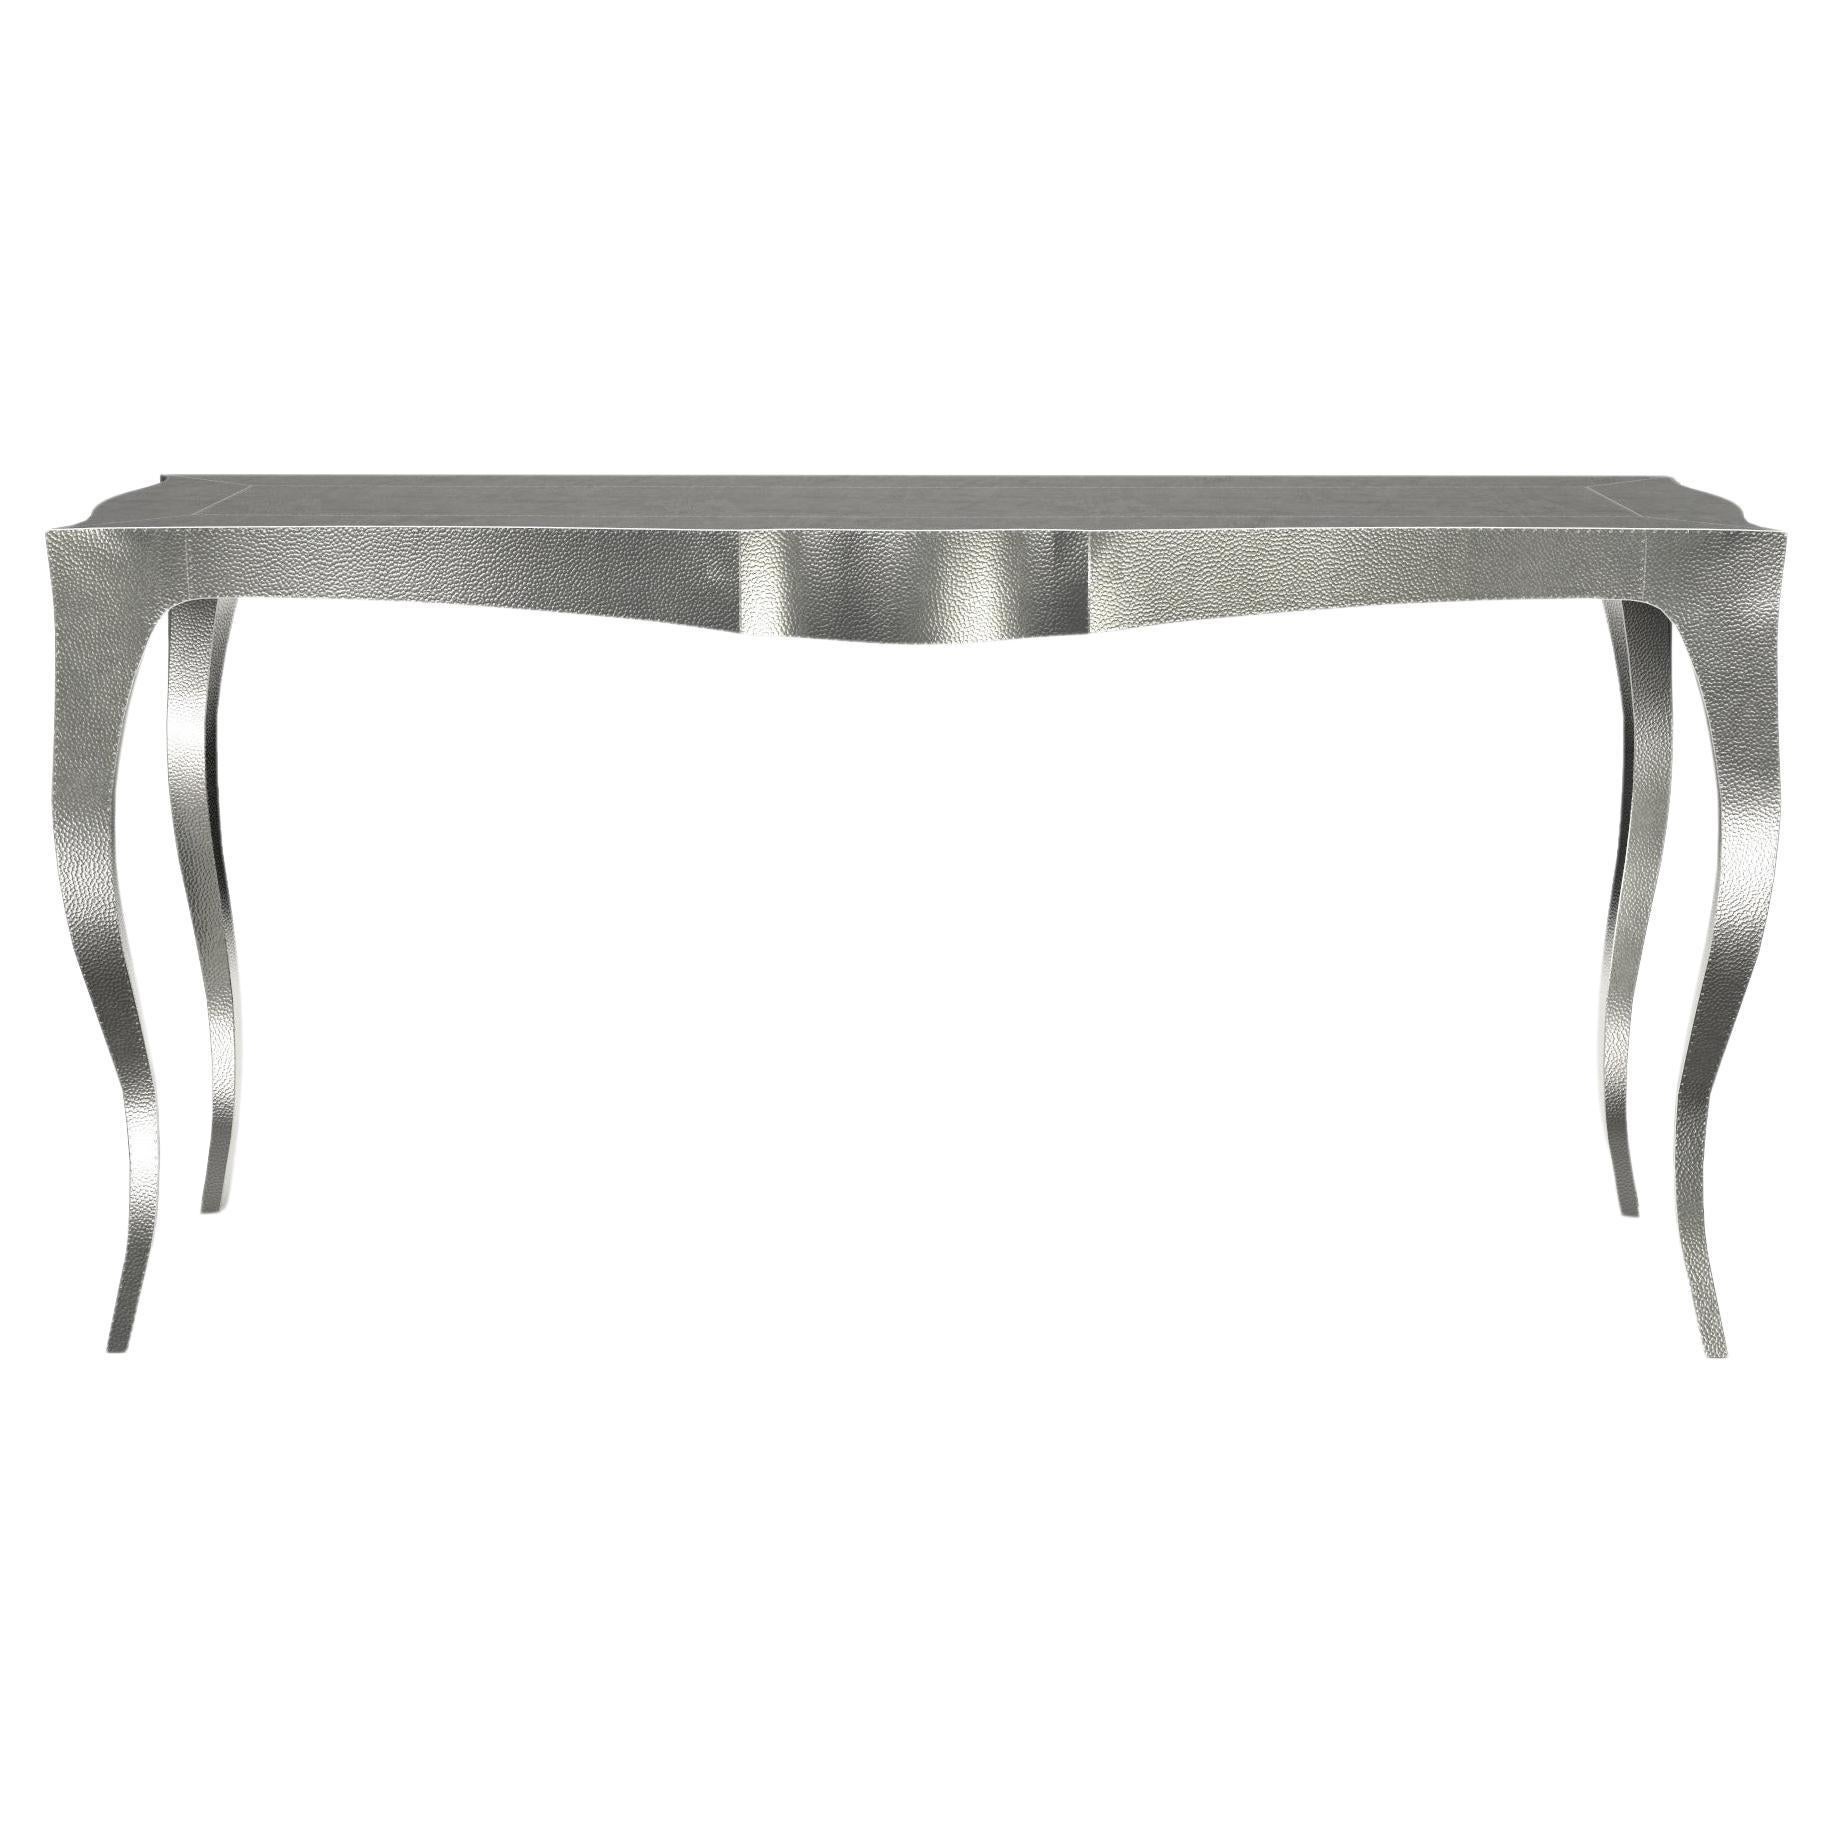 Louise Console Art Nouveau Tray Table Mid. Hammered White Bronze by Paul Mathieu